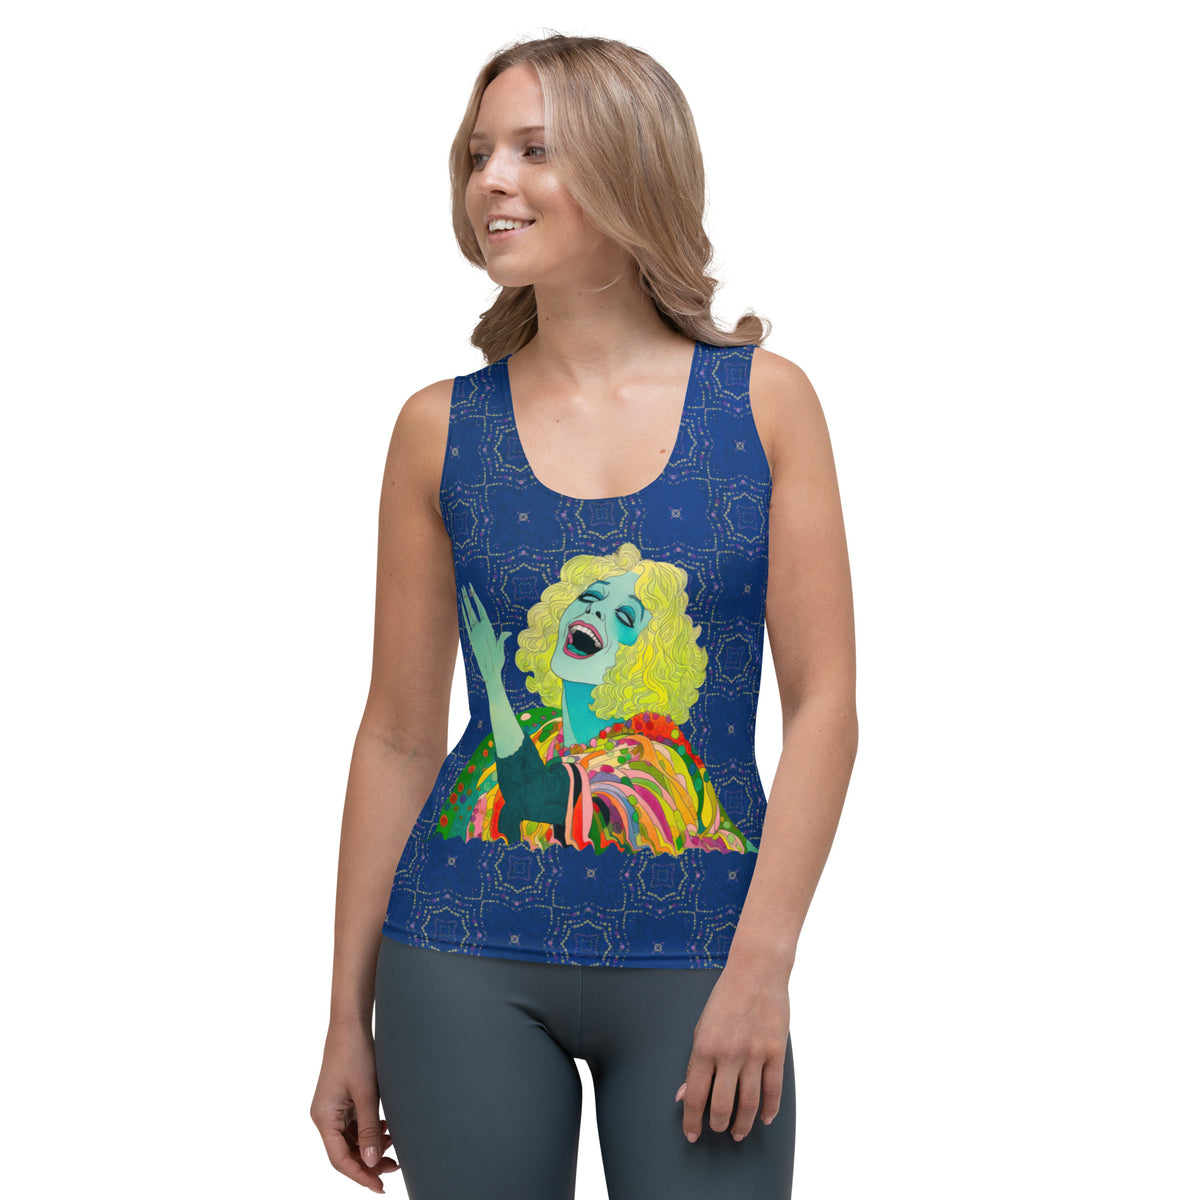 Model wearing Florals Fusion Women's Tank Top in a casual setting.